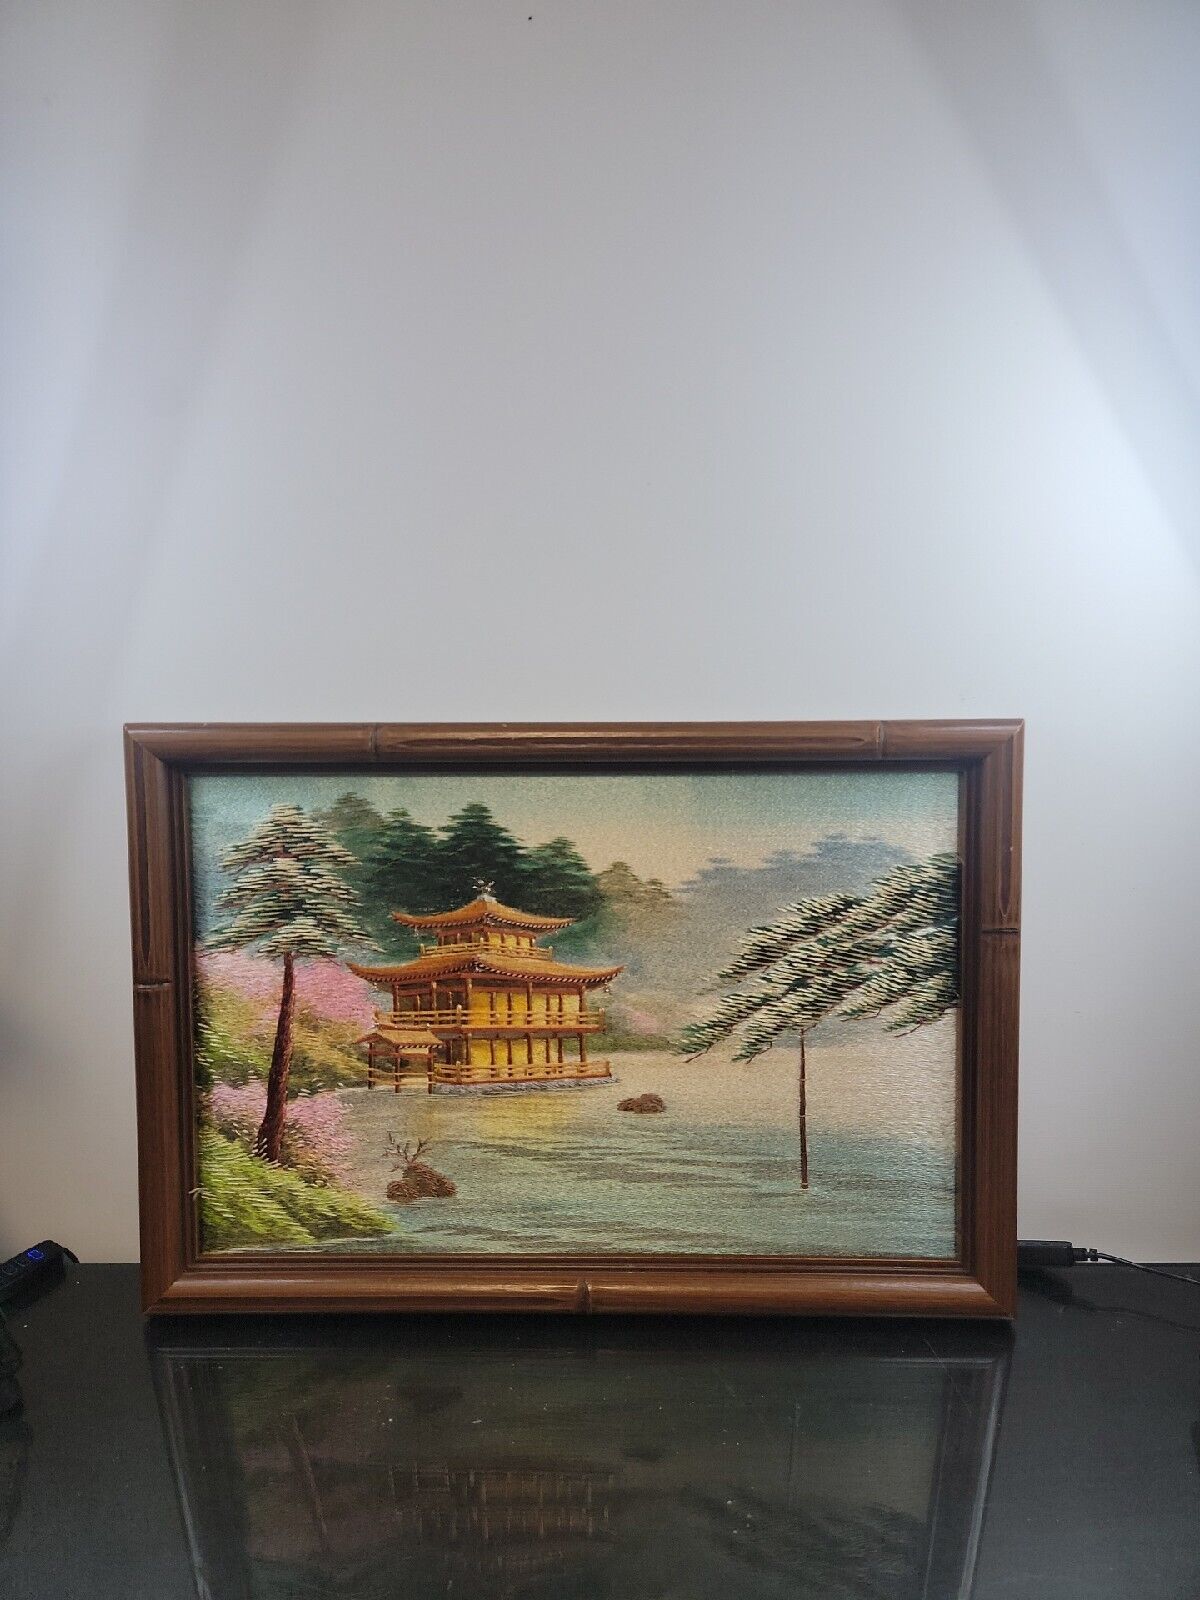 Hand Embroidered Picture Of Japan House By Lake Wooden Frame Wall Art